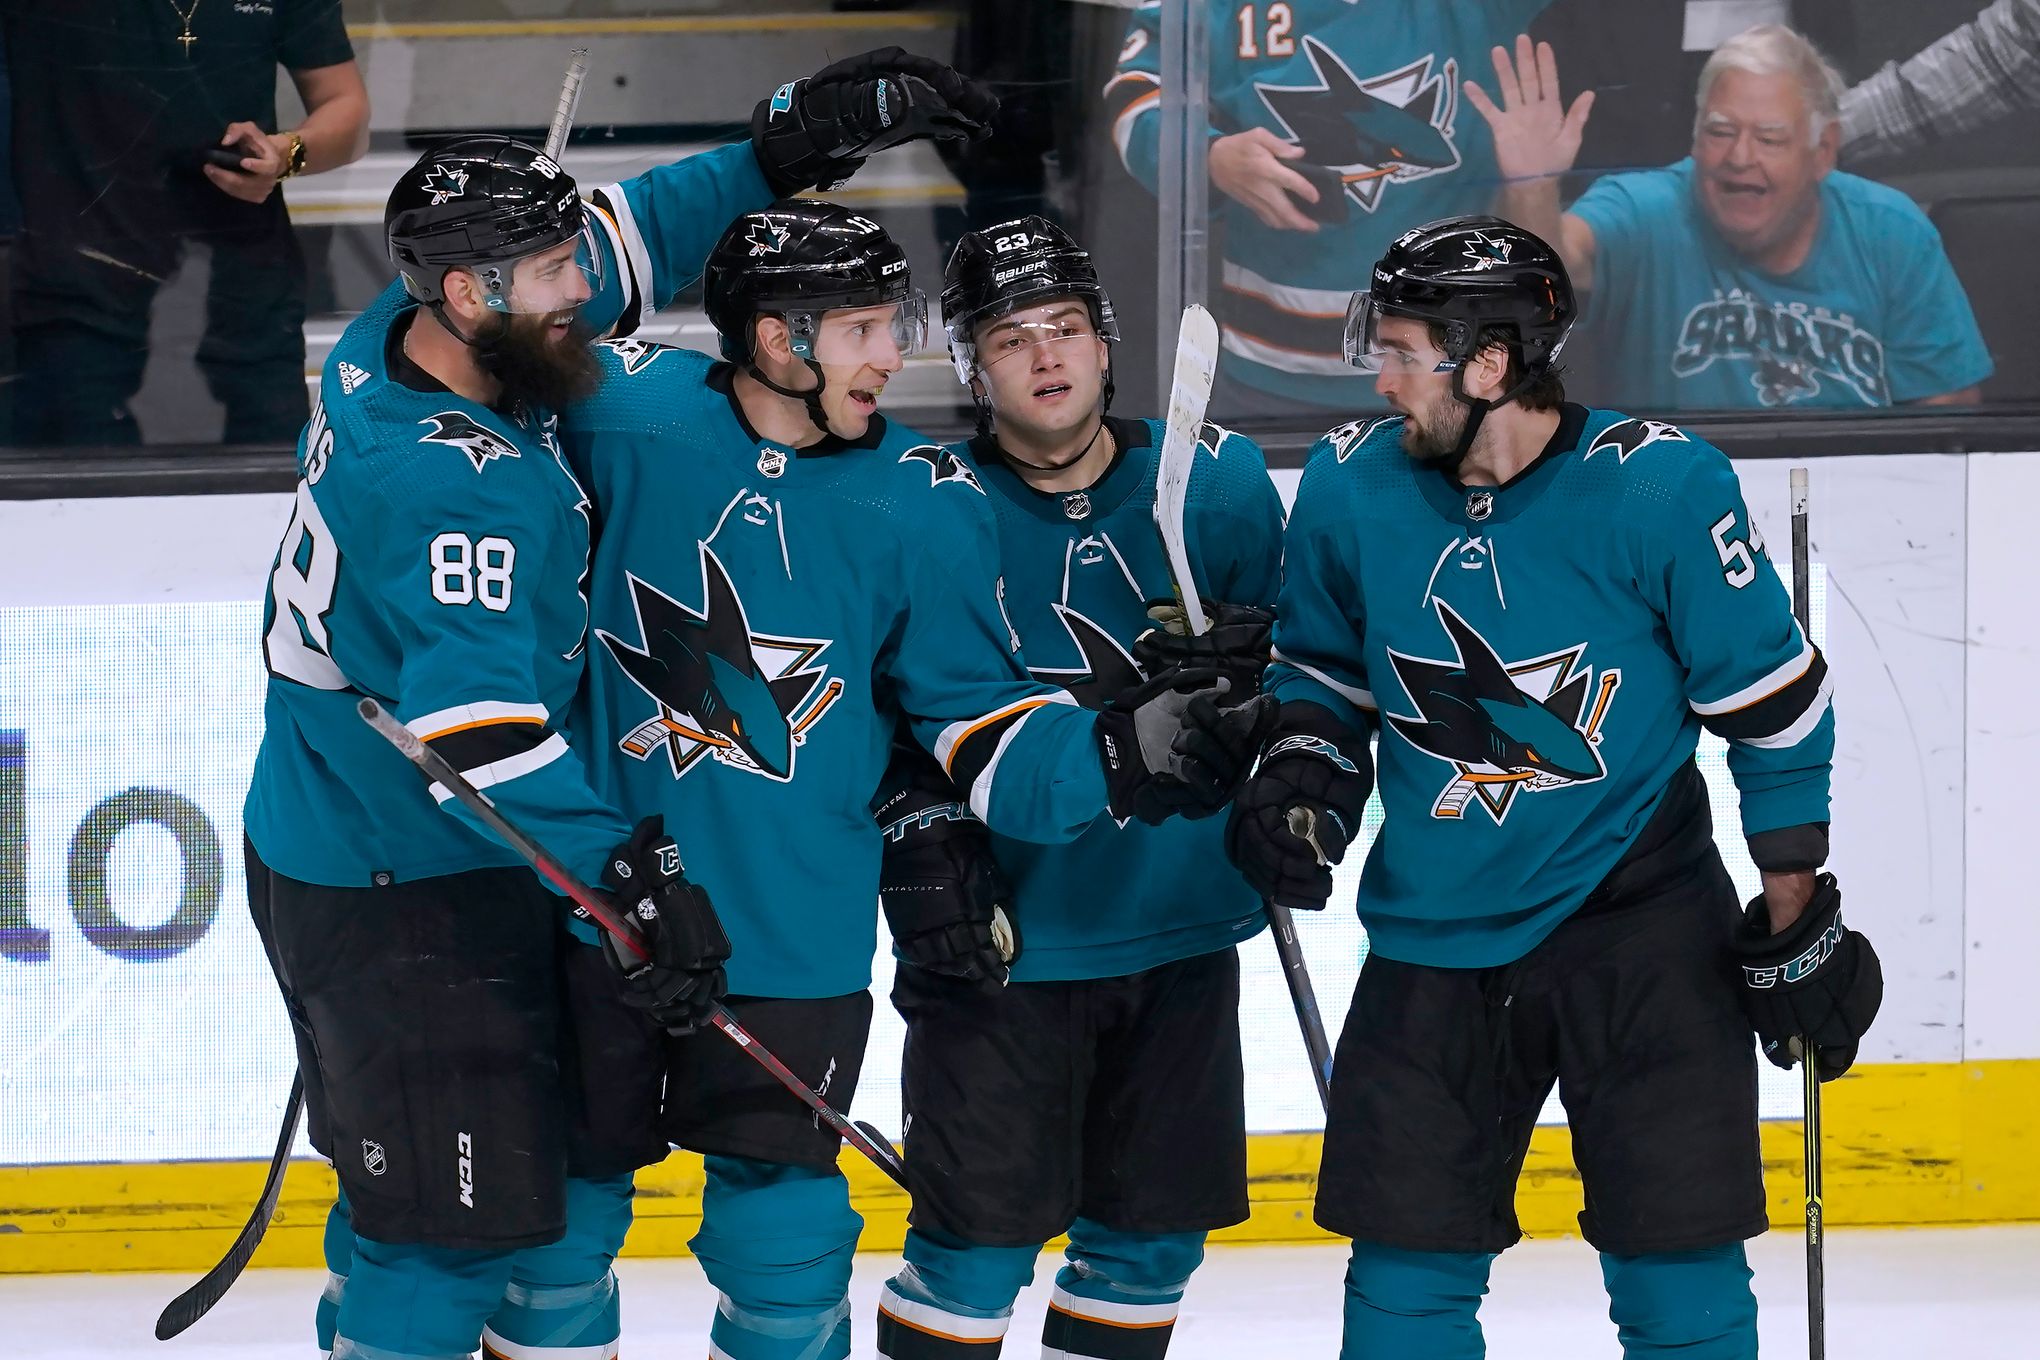 Timo Meier has goal and assist, Sharks top Wild 4-1